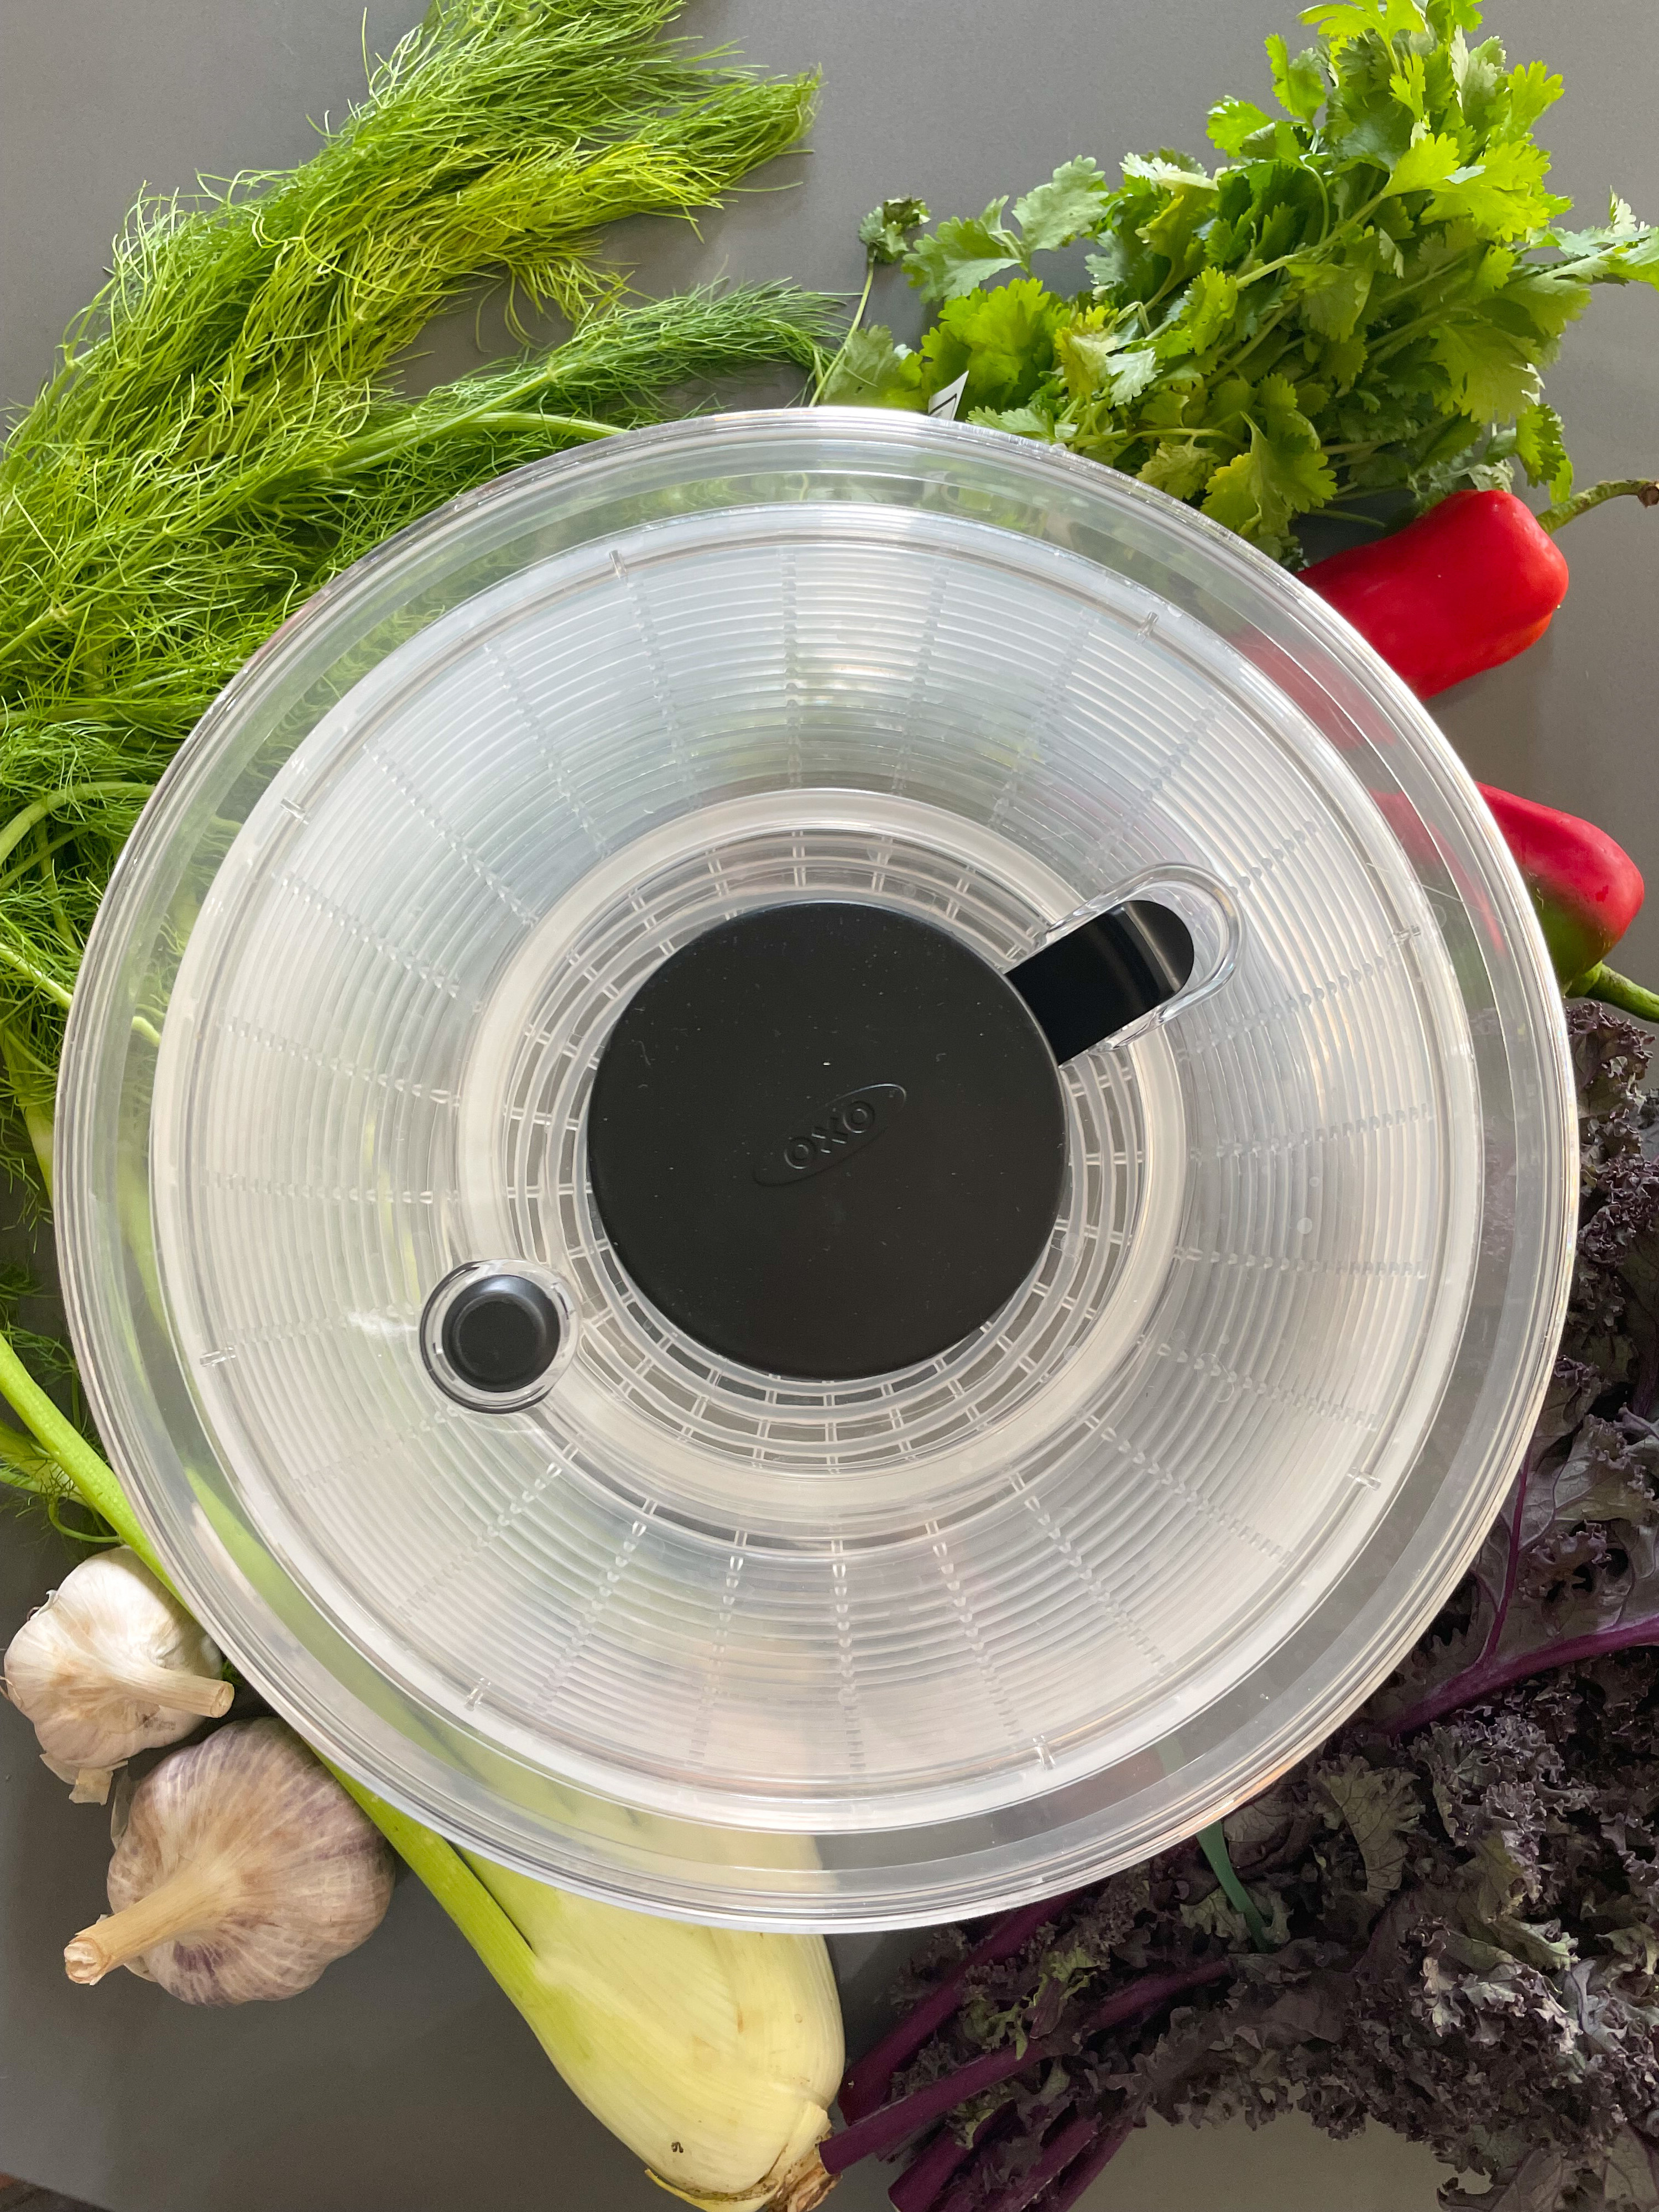 a top-down view of the salad spinner surrounded by fresh veggies